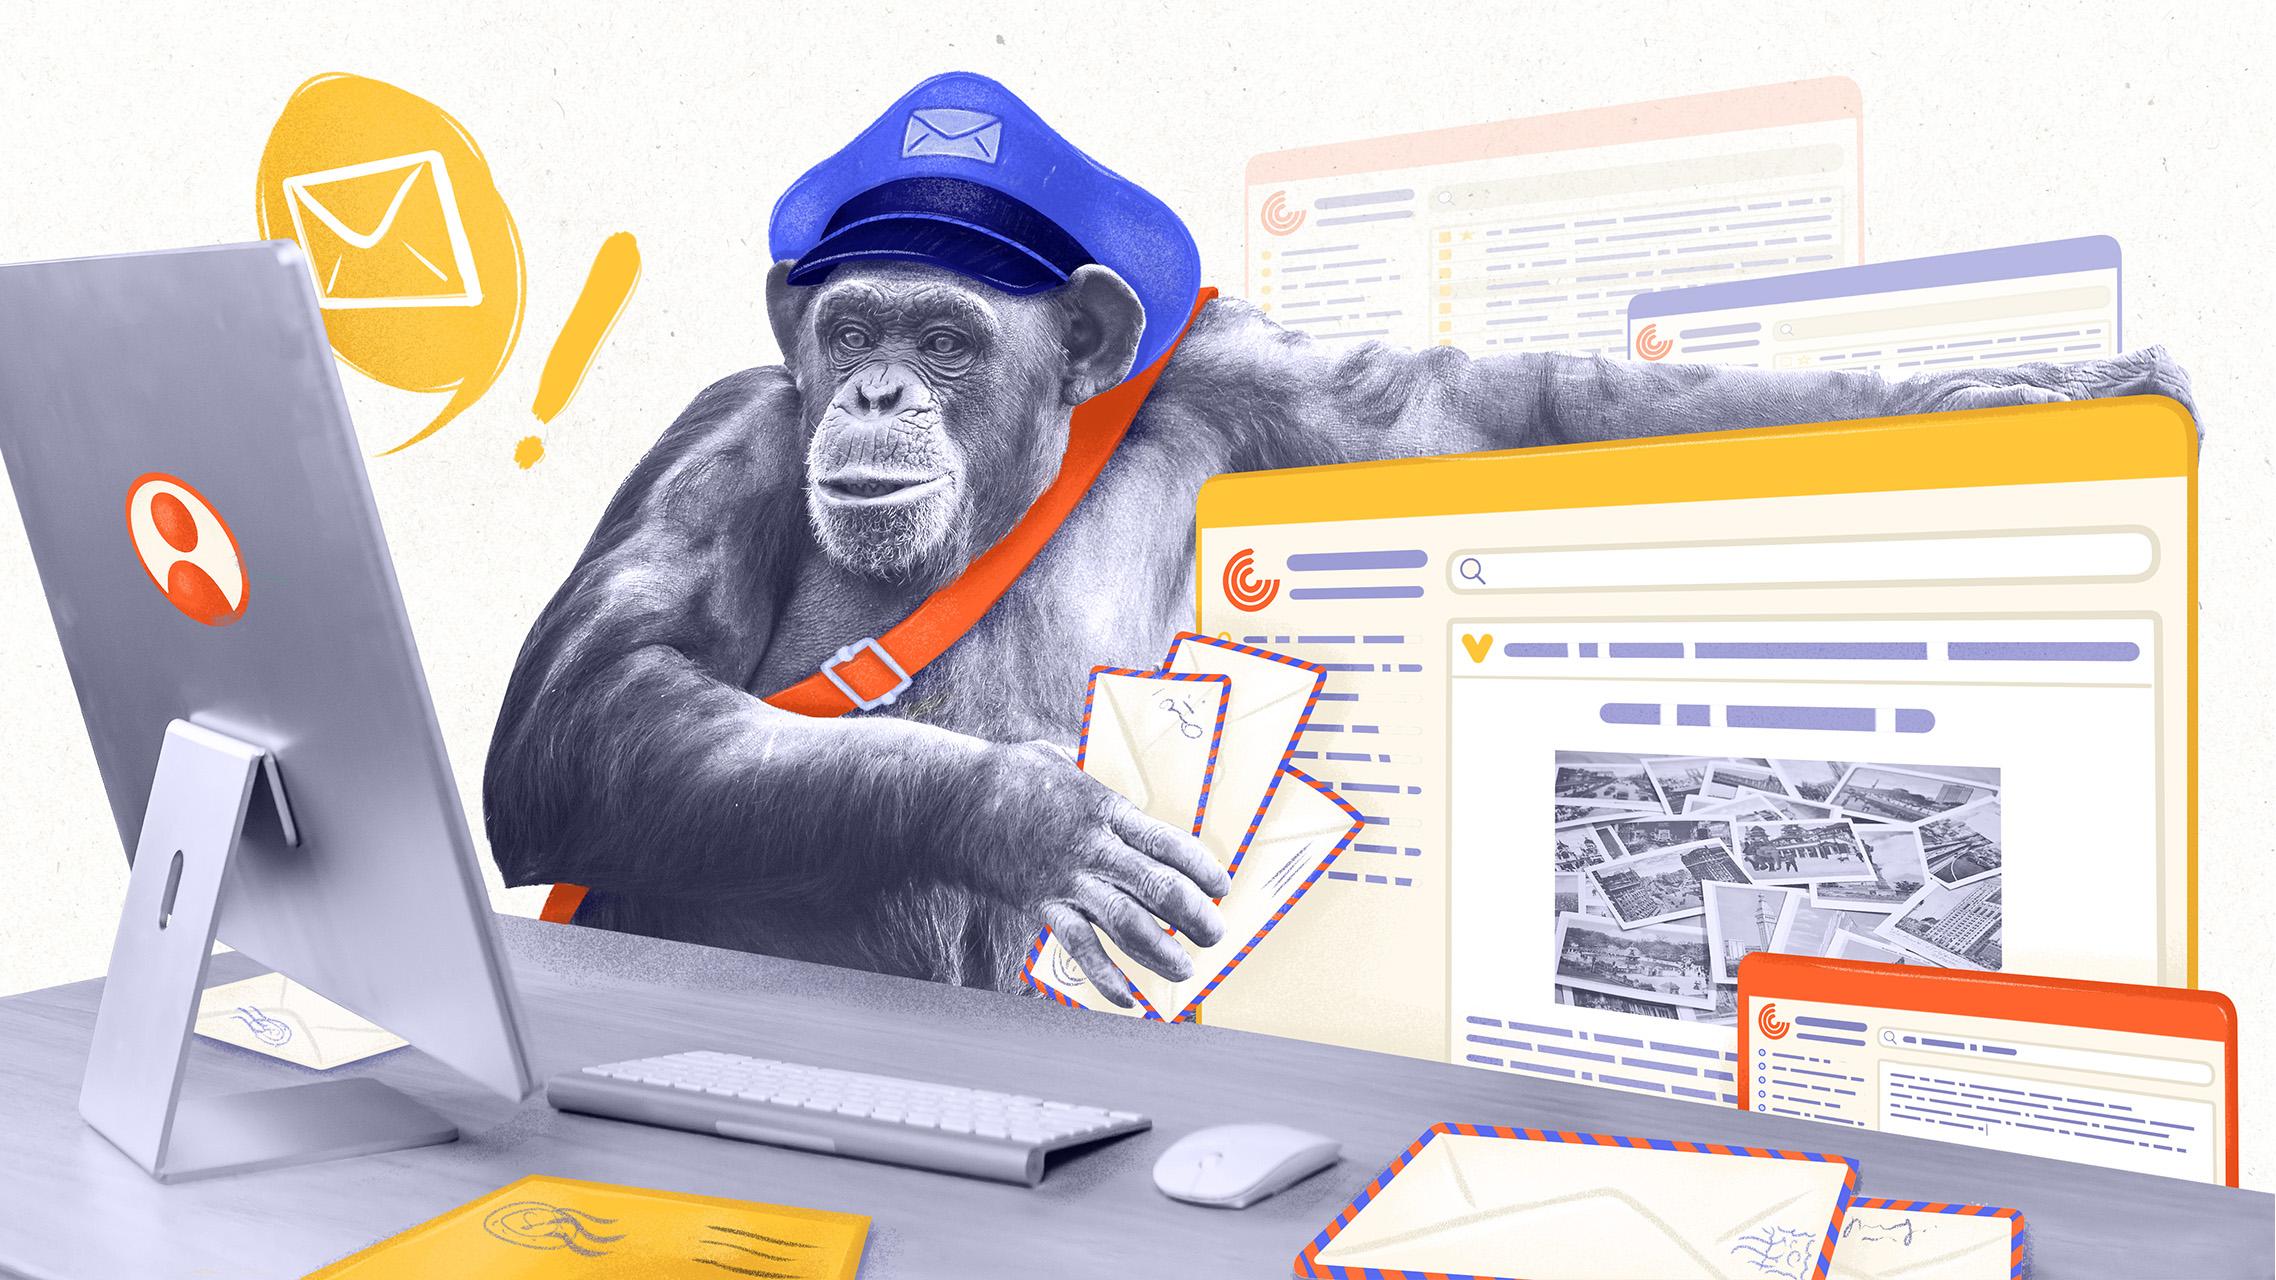 How to Build an Email Service Like Mailchimp